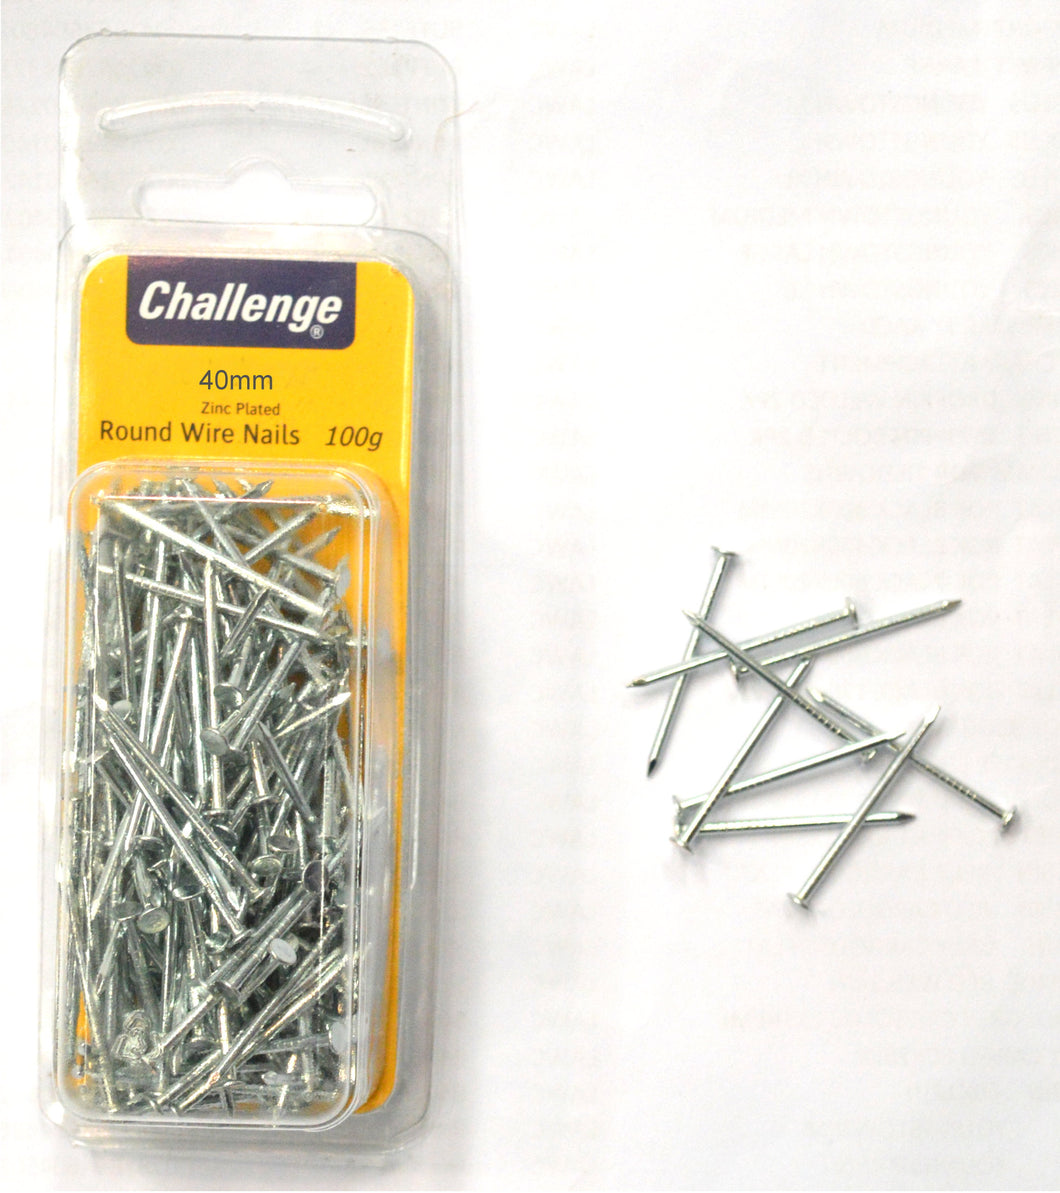 Flathead Wire Nails ZP - 100gm Blister Pack 40mm Challenge